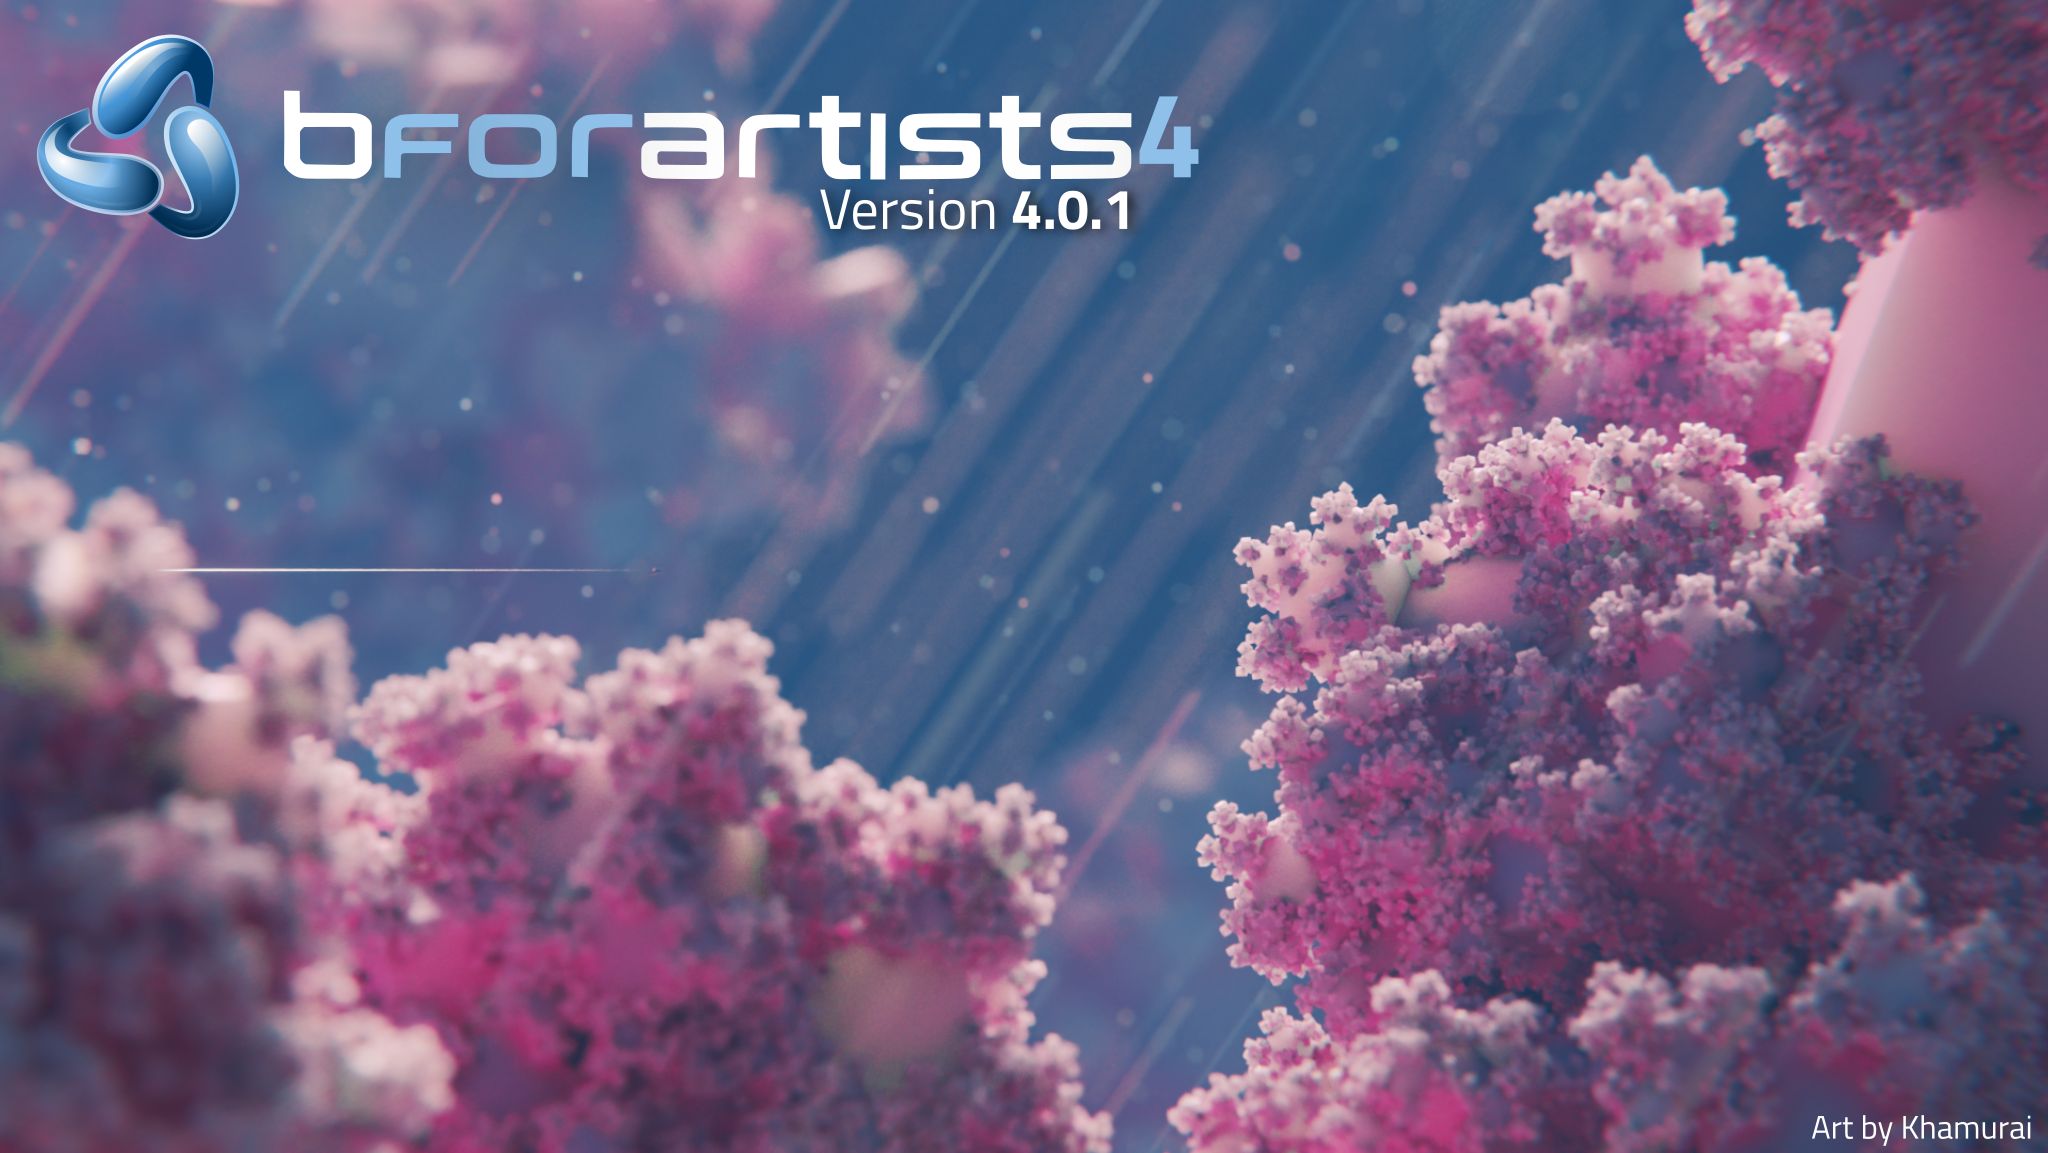 You are currently viewing Bforartists 4 – Version 4.0.1 Official Release